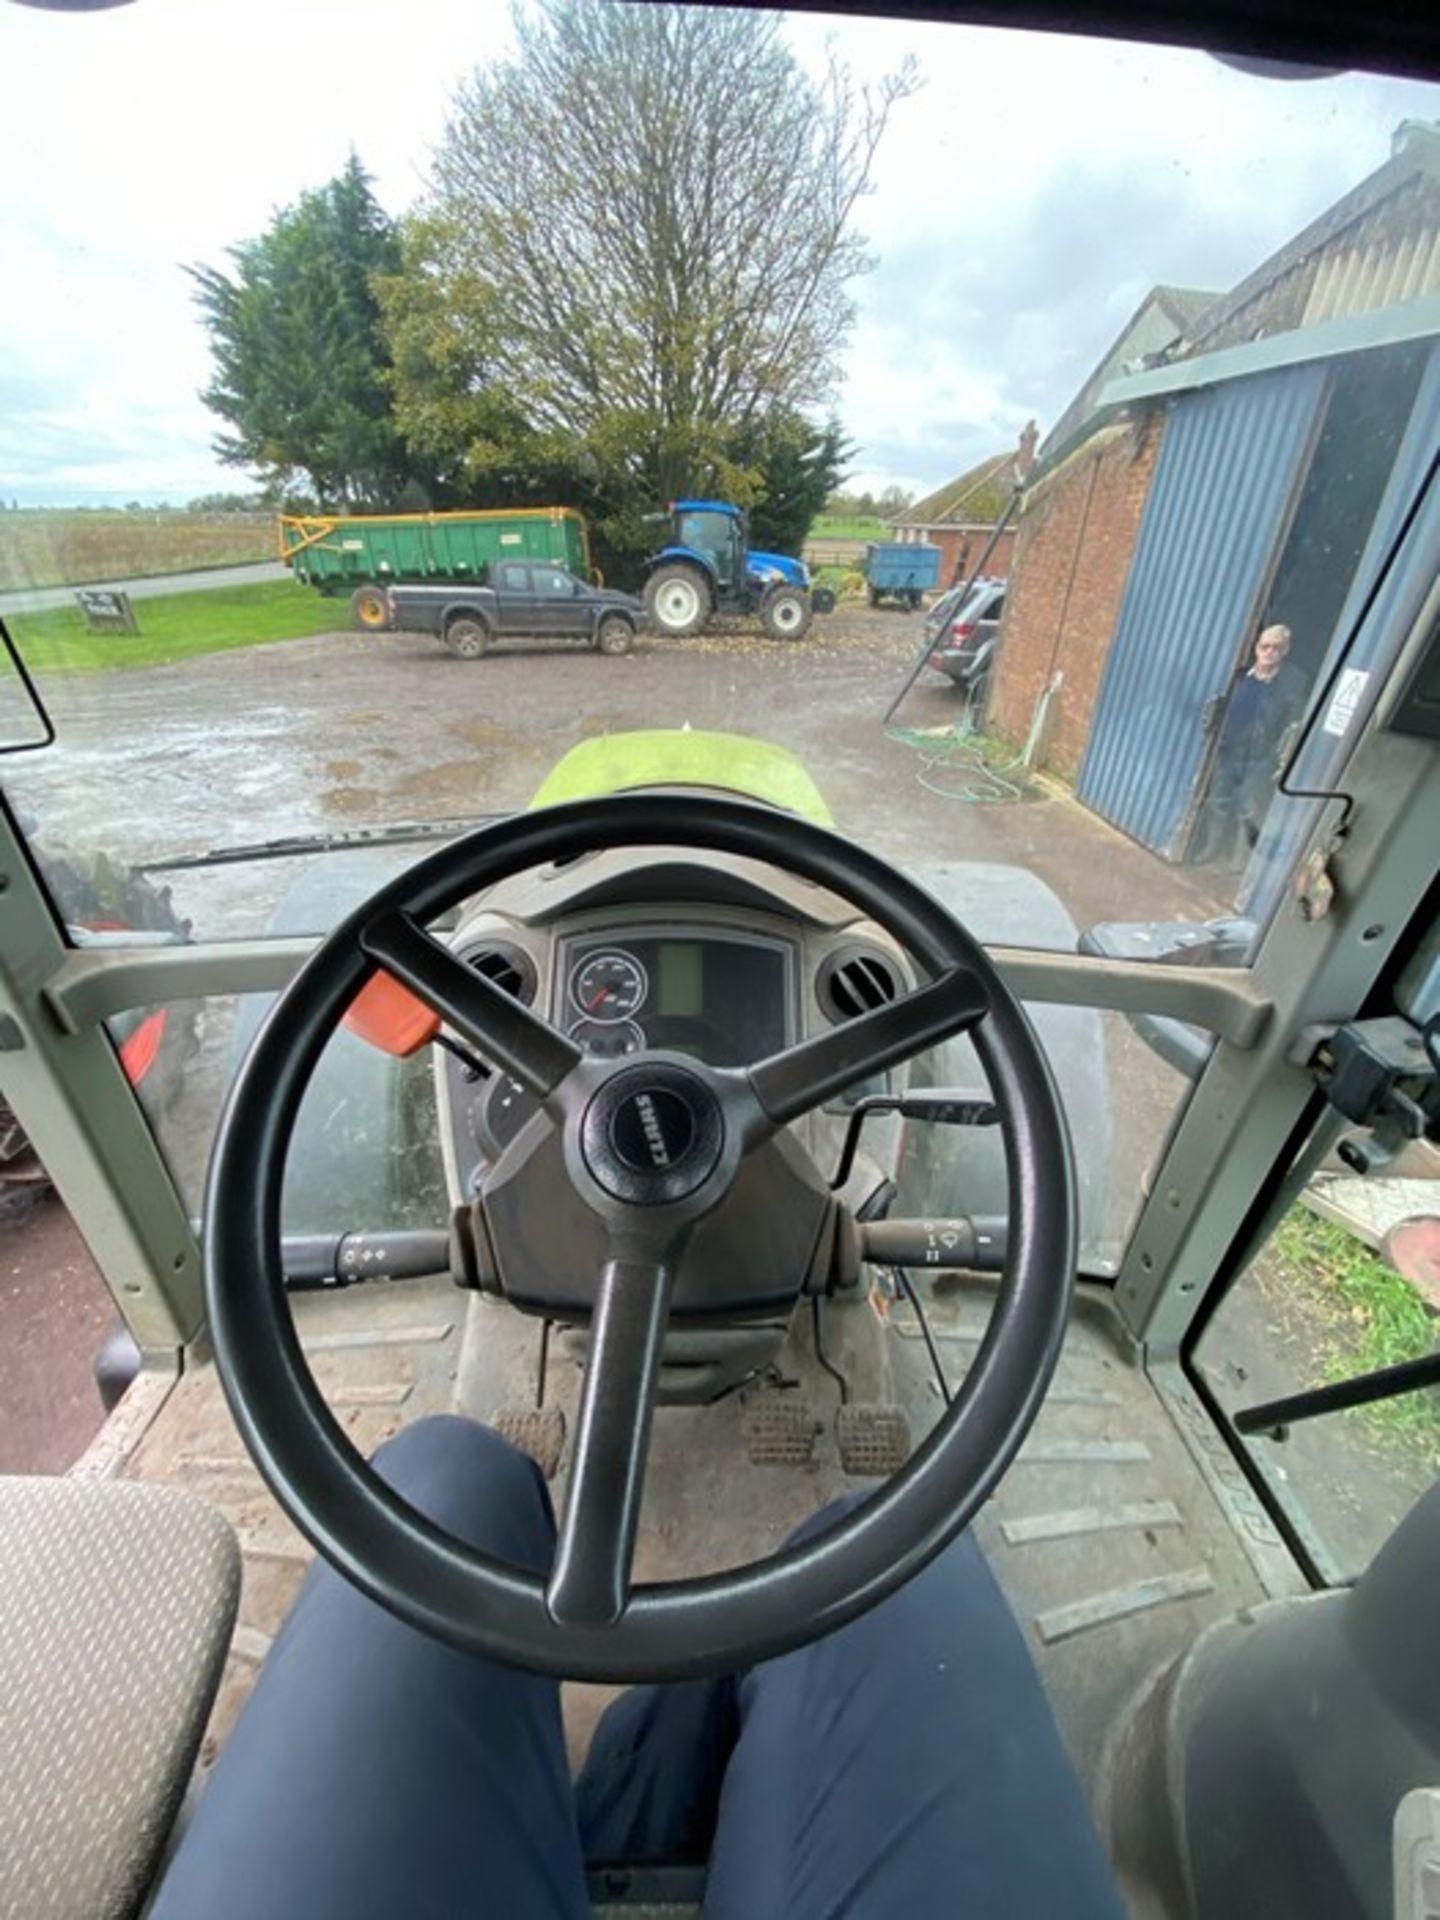 2009 Claas Arion 620 Tractor, 5571hrs, Reg Number AU09 DLN, serial number A1902356 - Image 4 of 5